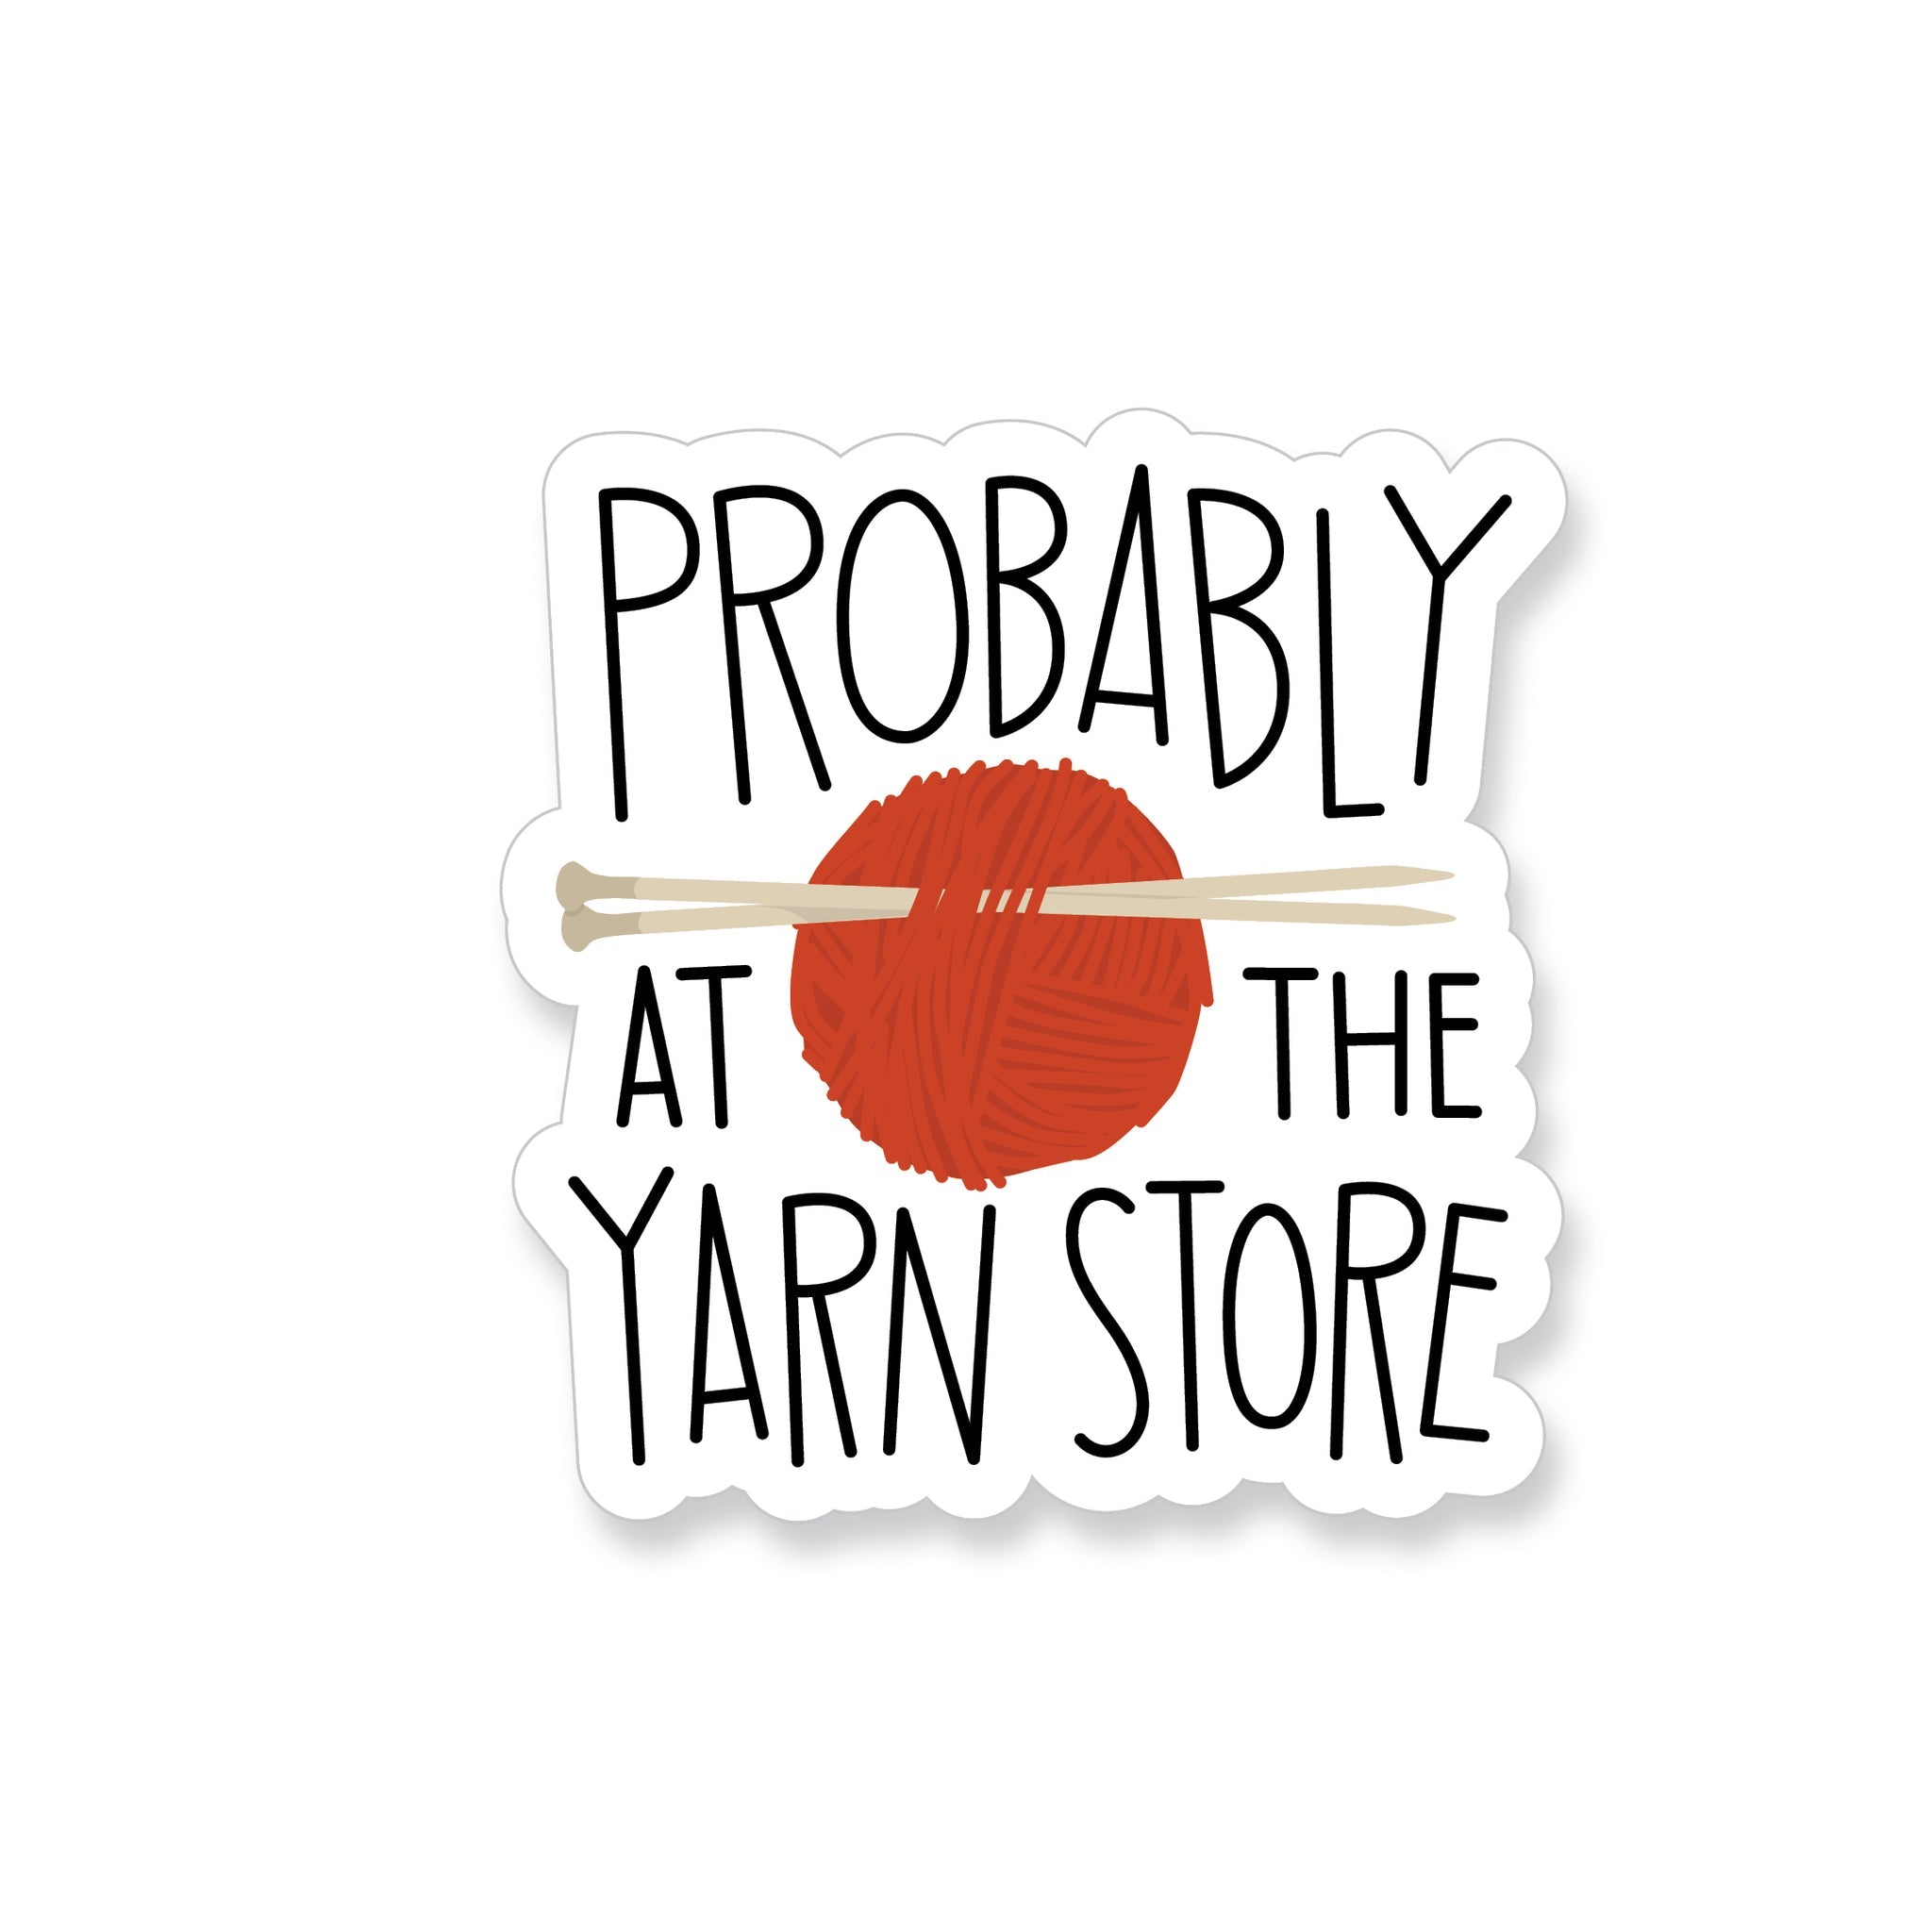 Probably at the Yarn Store - Apartment 2 stickers